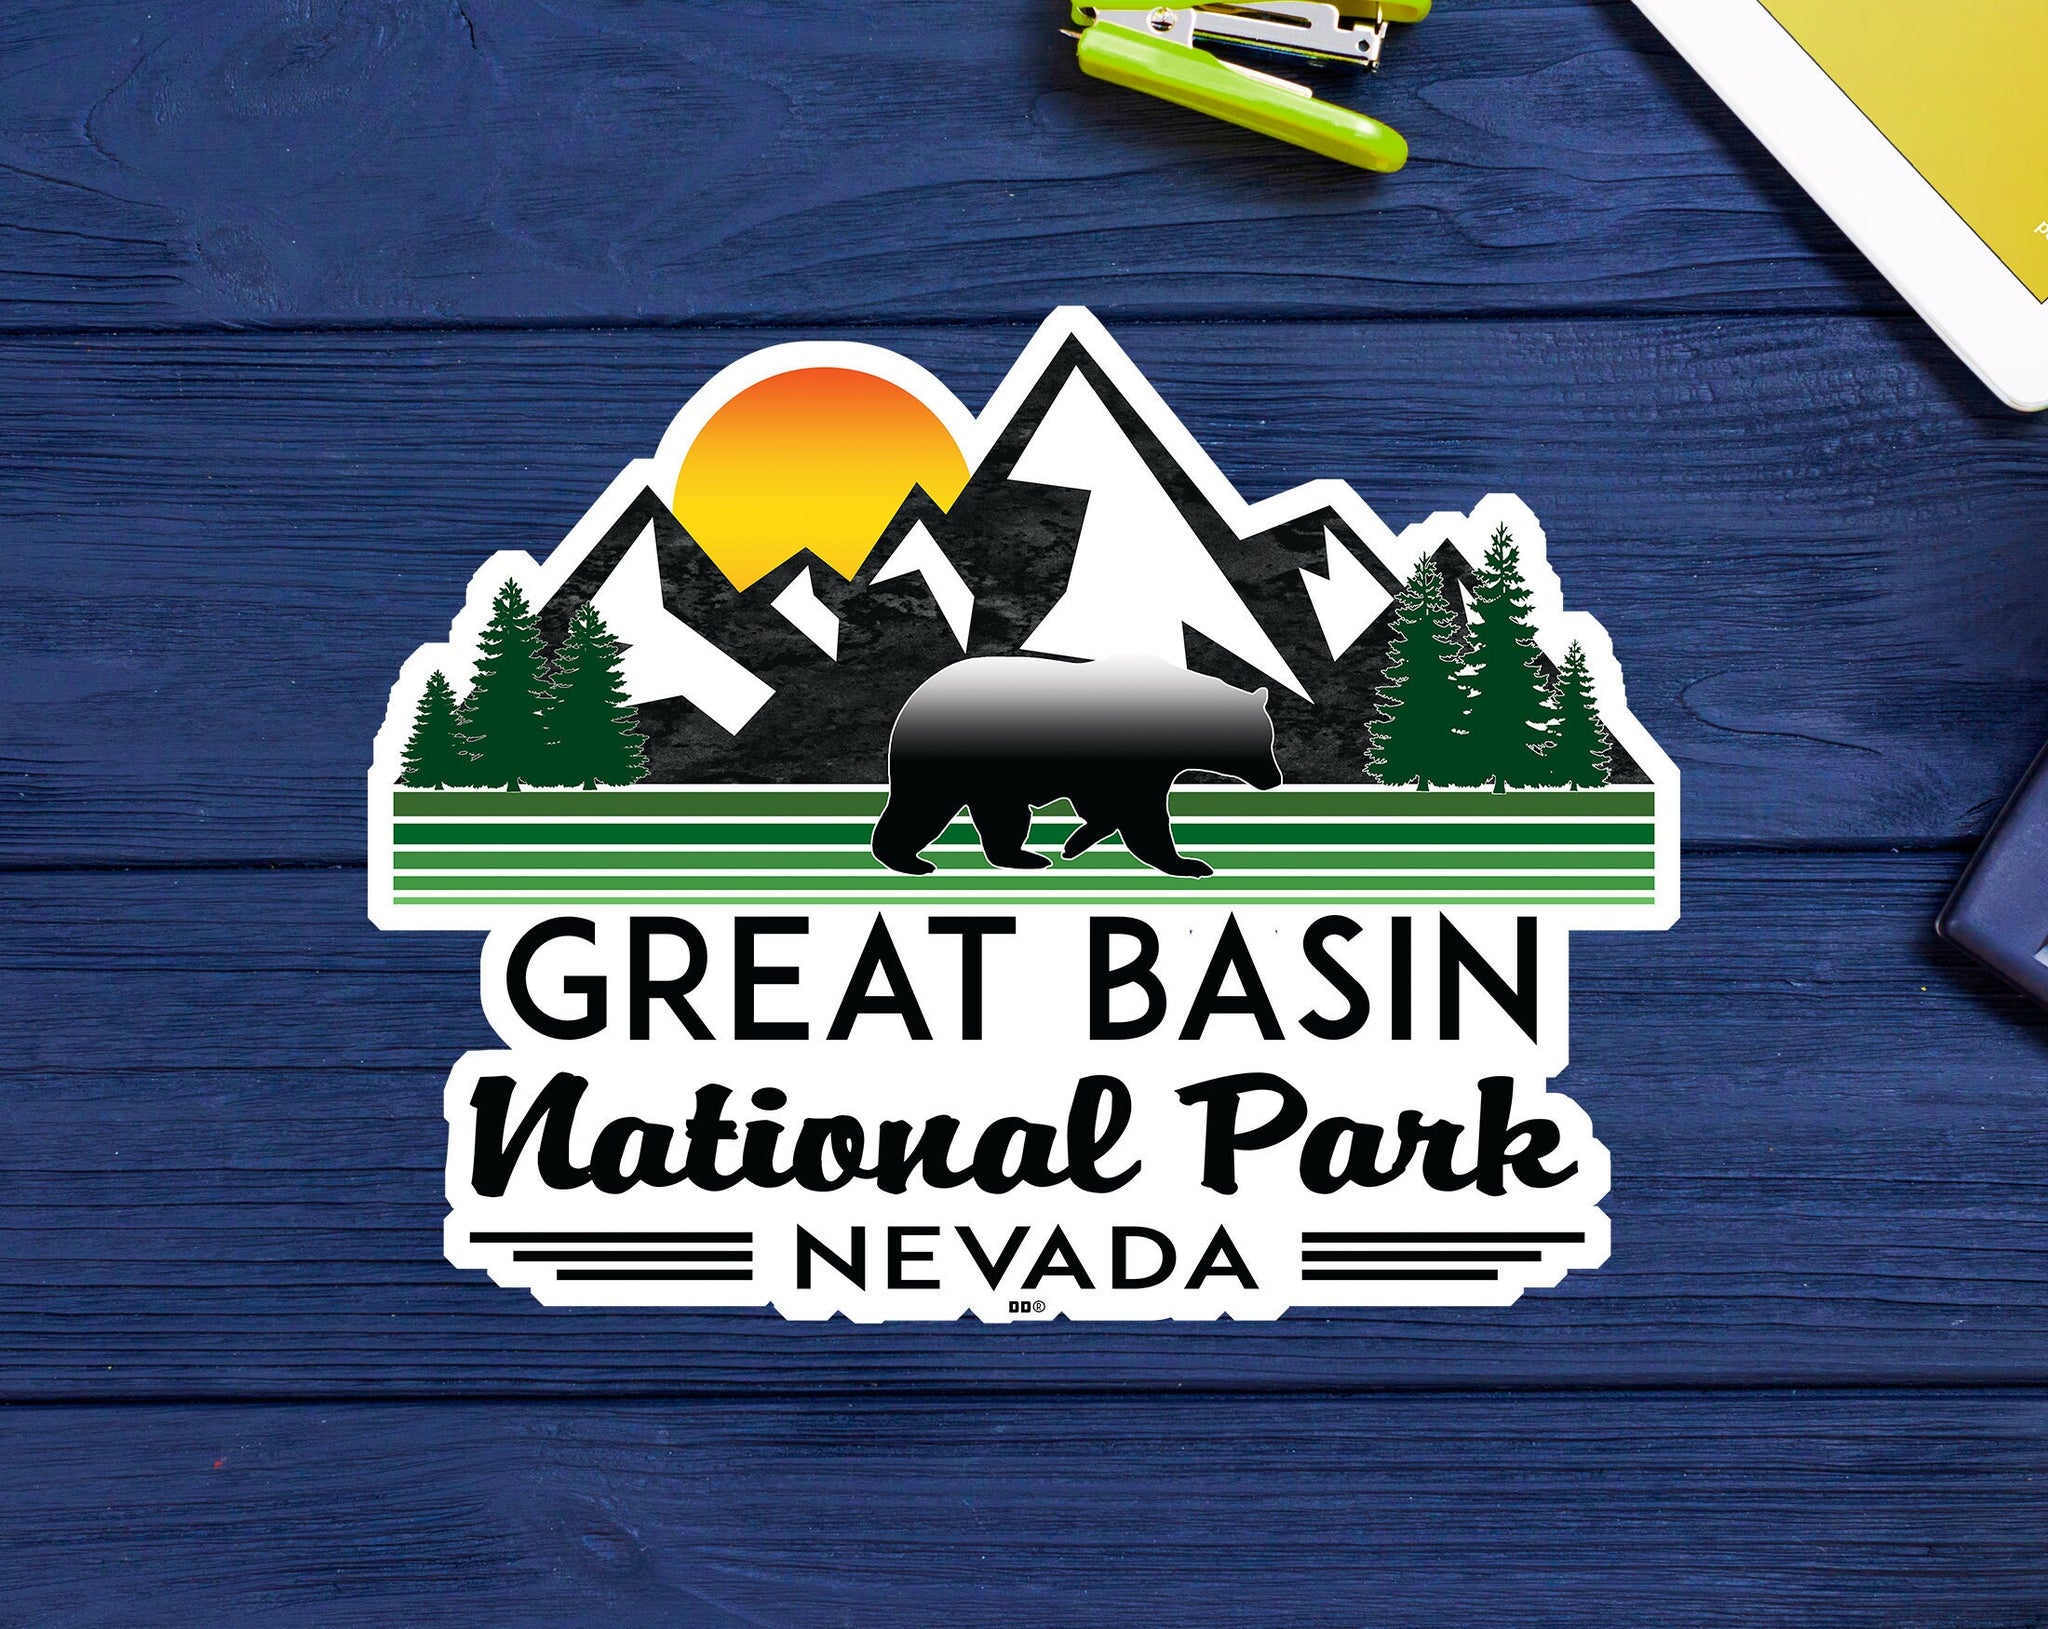 Great Basin National Park Nevada Vinyl Sticker Decal 3.9" NV Indoors Or Outdoors